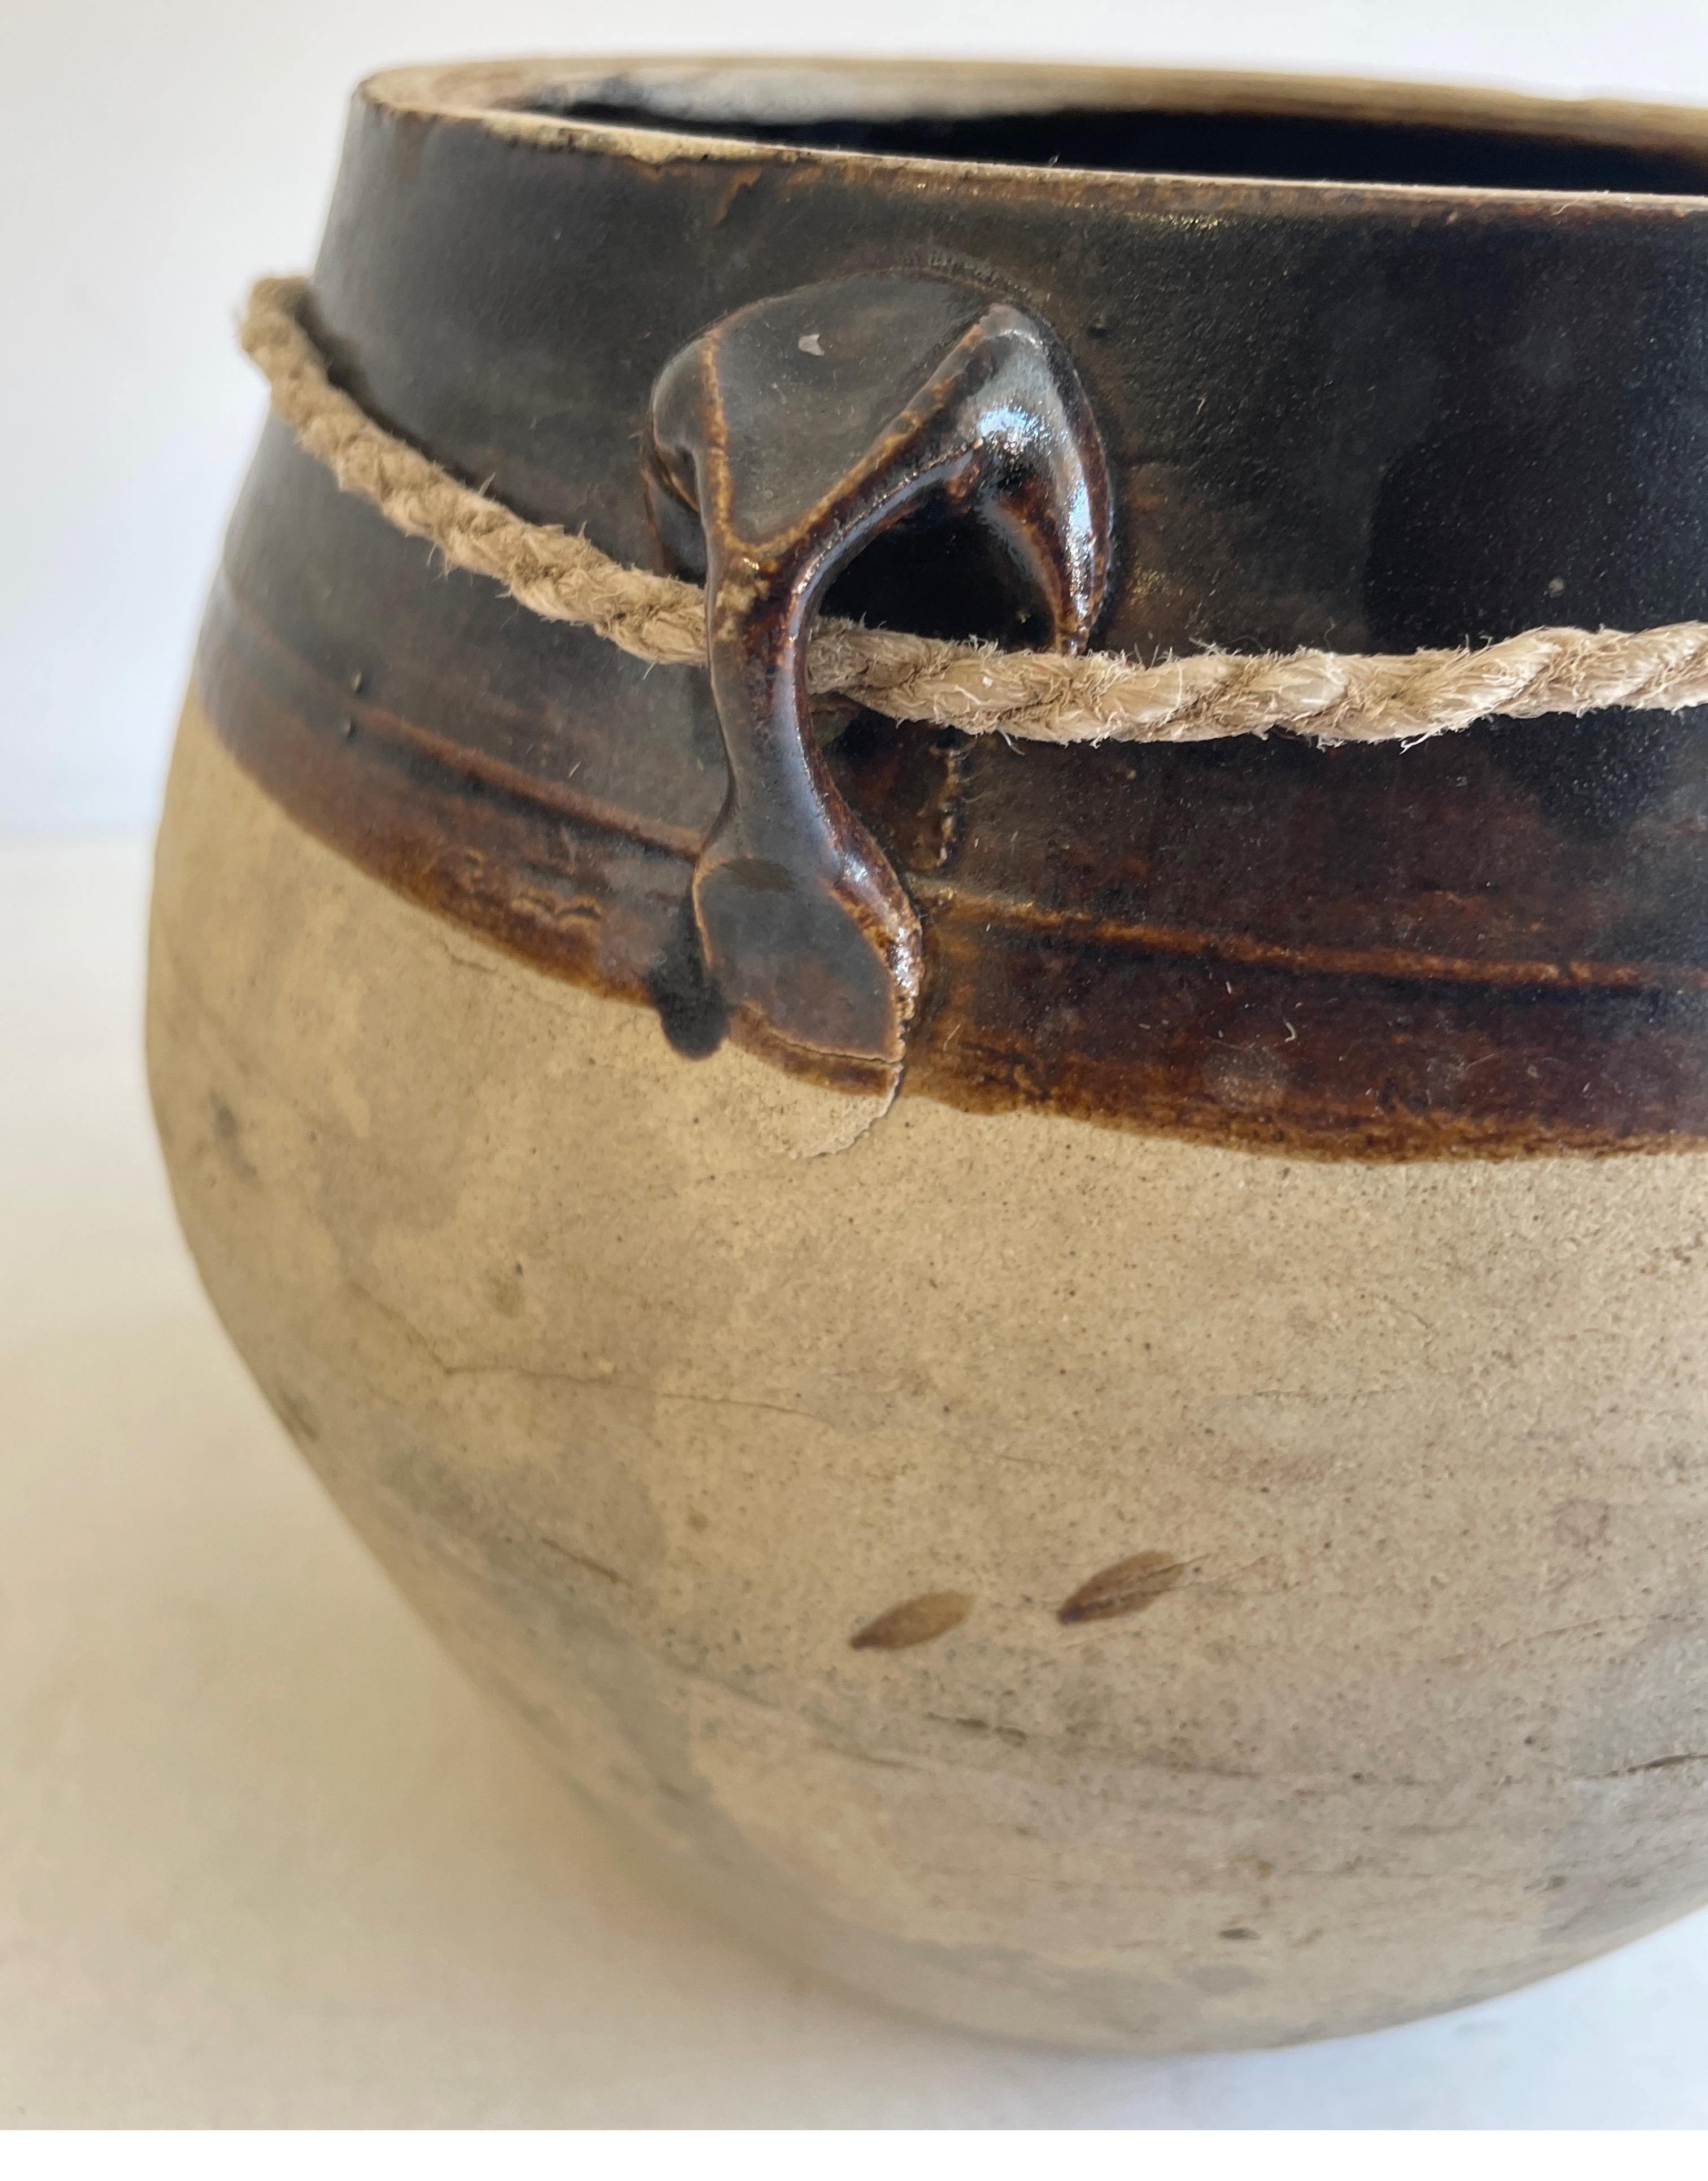 Vintage Pottery Beautiful and rich in character, this vintage oil pot adds just the right amount of texture + warmth where you need it. Stunning faded black/ brown unglazed finish with warm terra-cotta accents. Some have a more faded appearance than